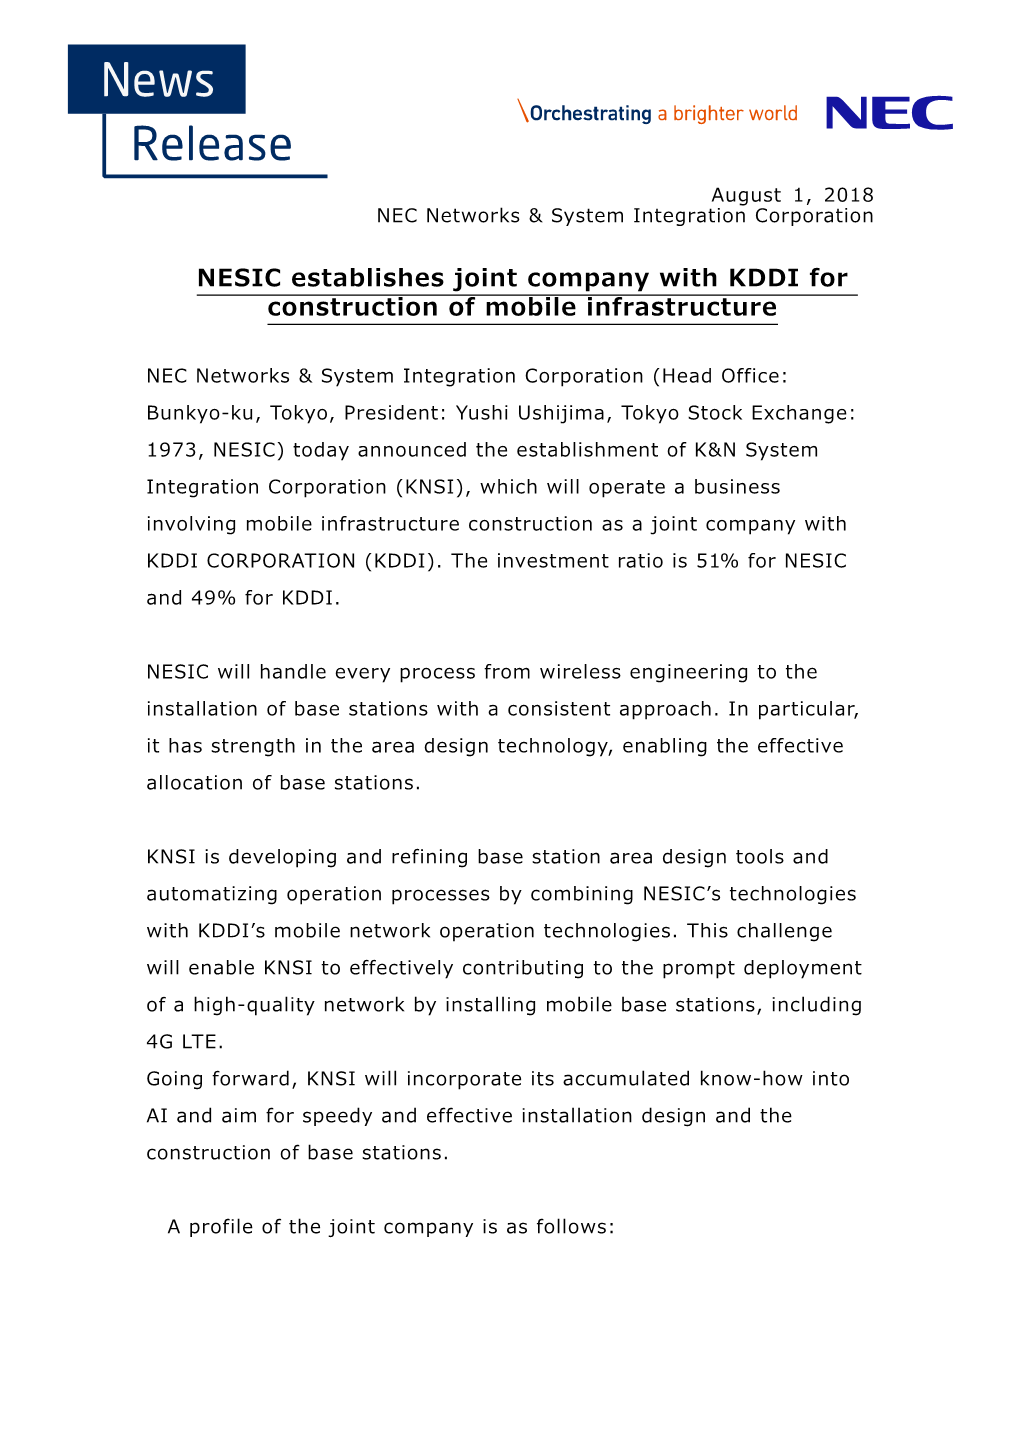 NESIC Establishes Joint Company with KDDI for Construction of Mobile Infrastructure